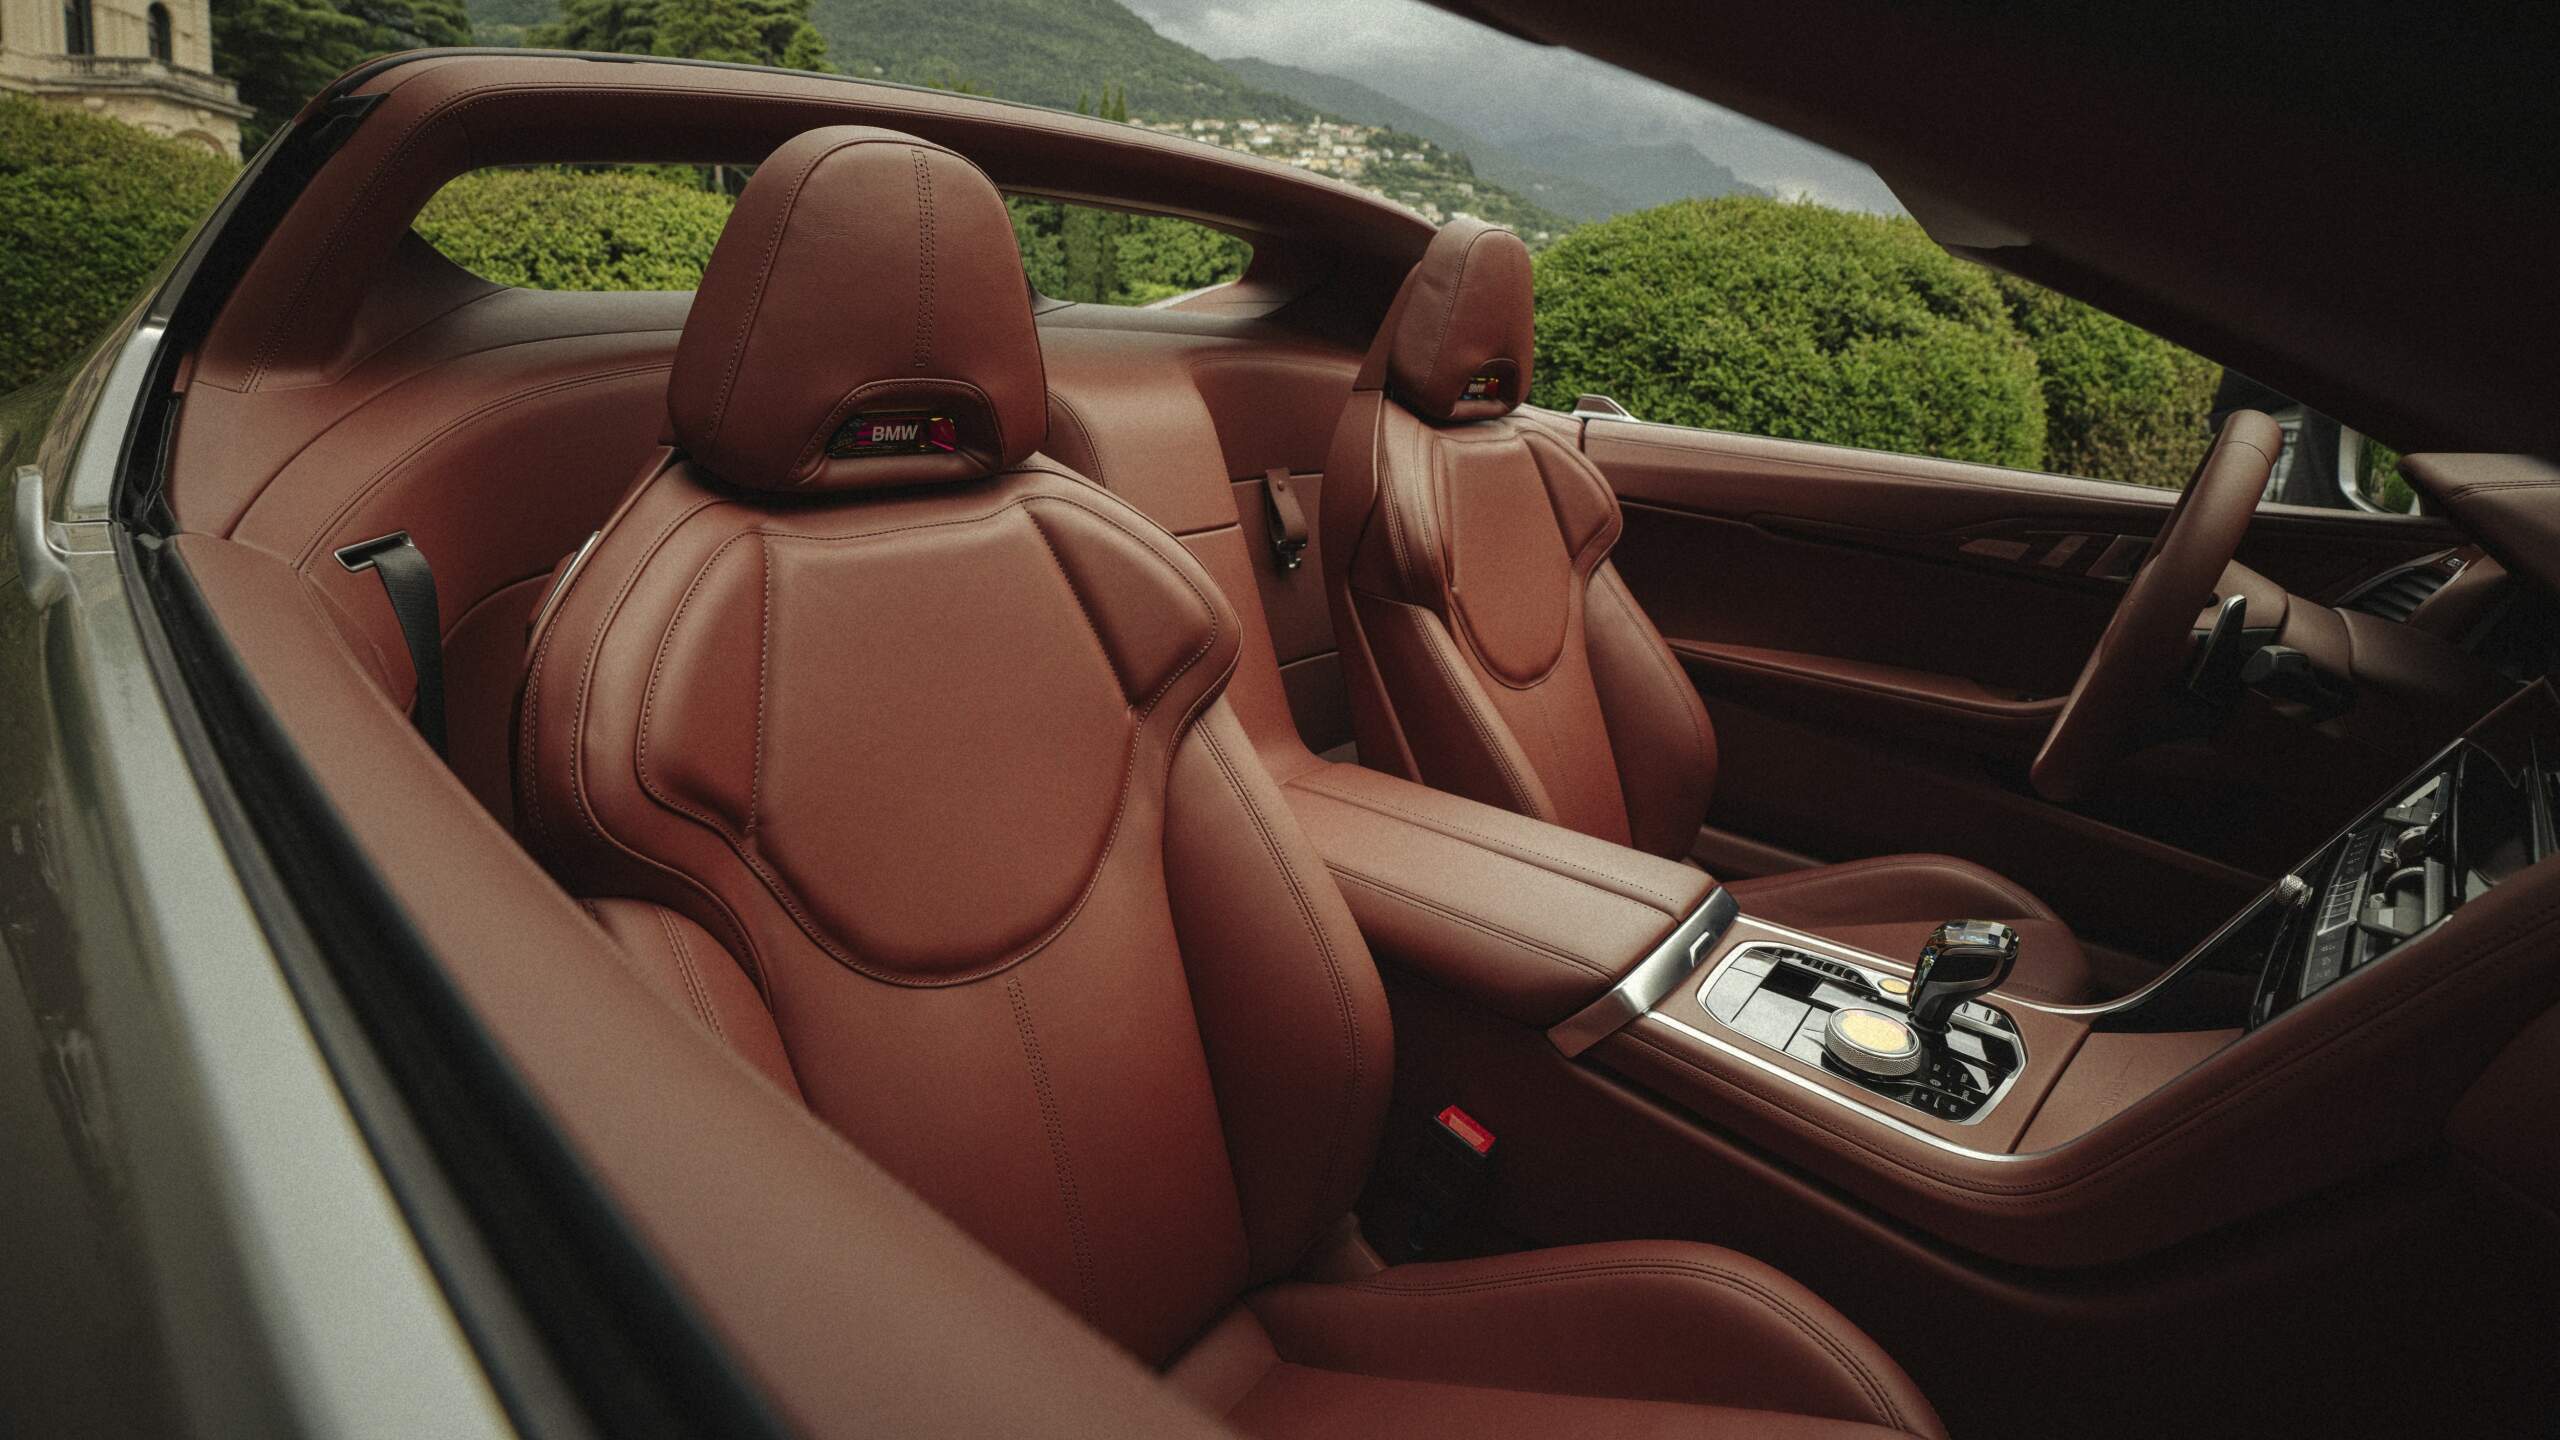 The Brogue-Style Leather Surfaces Interior Of The BMW Concept Skytop With Reddish-Brown Seats